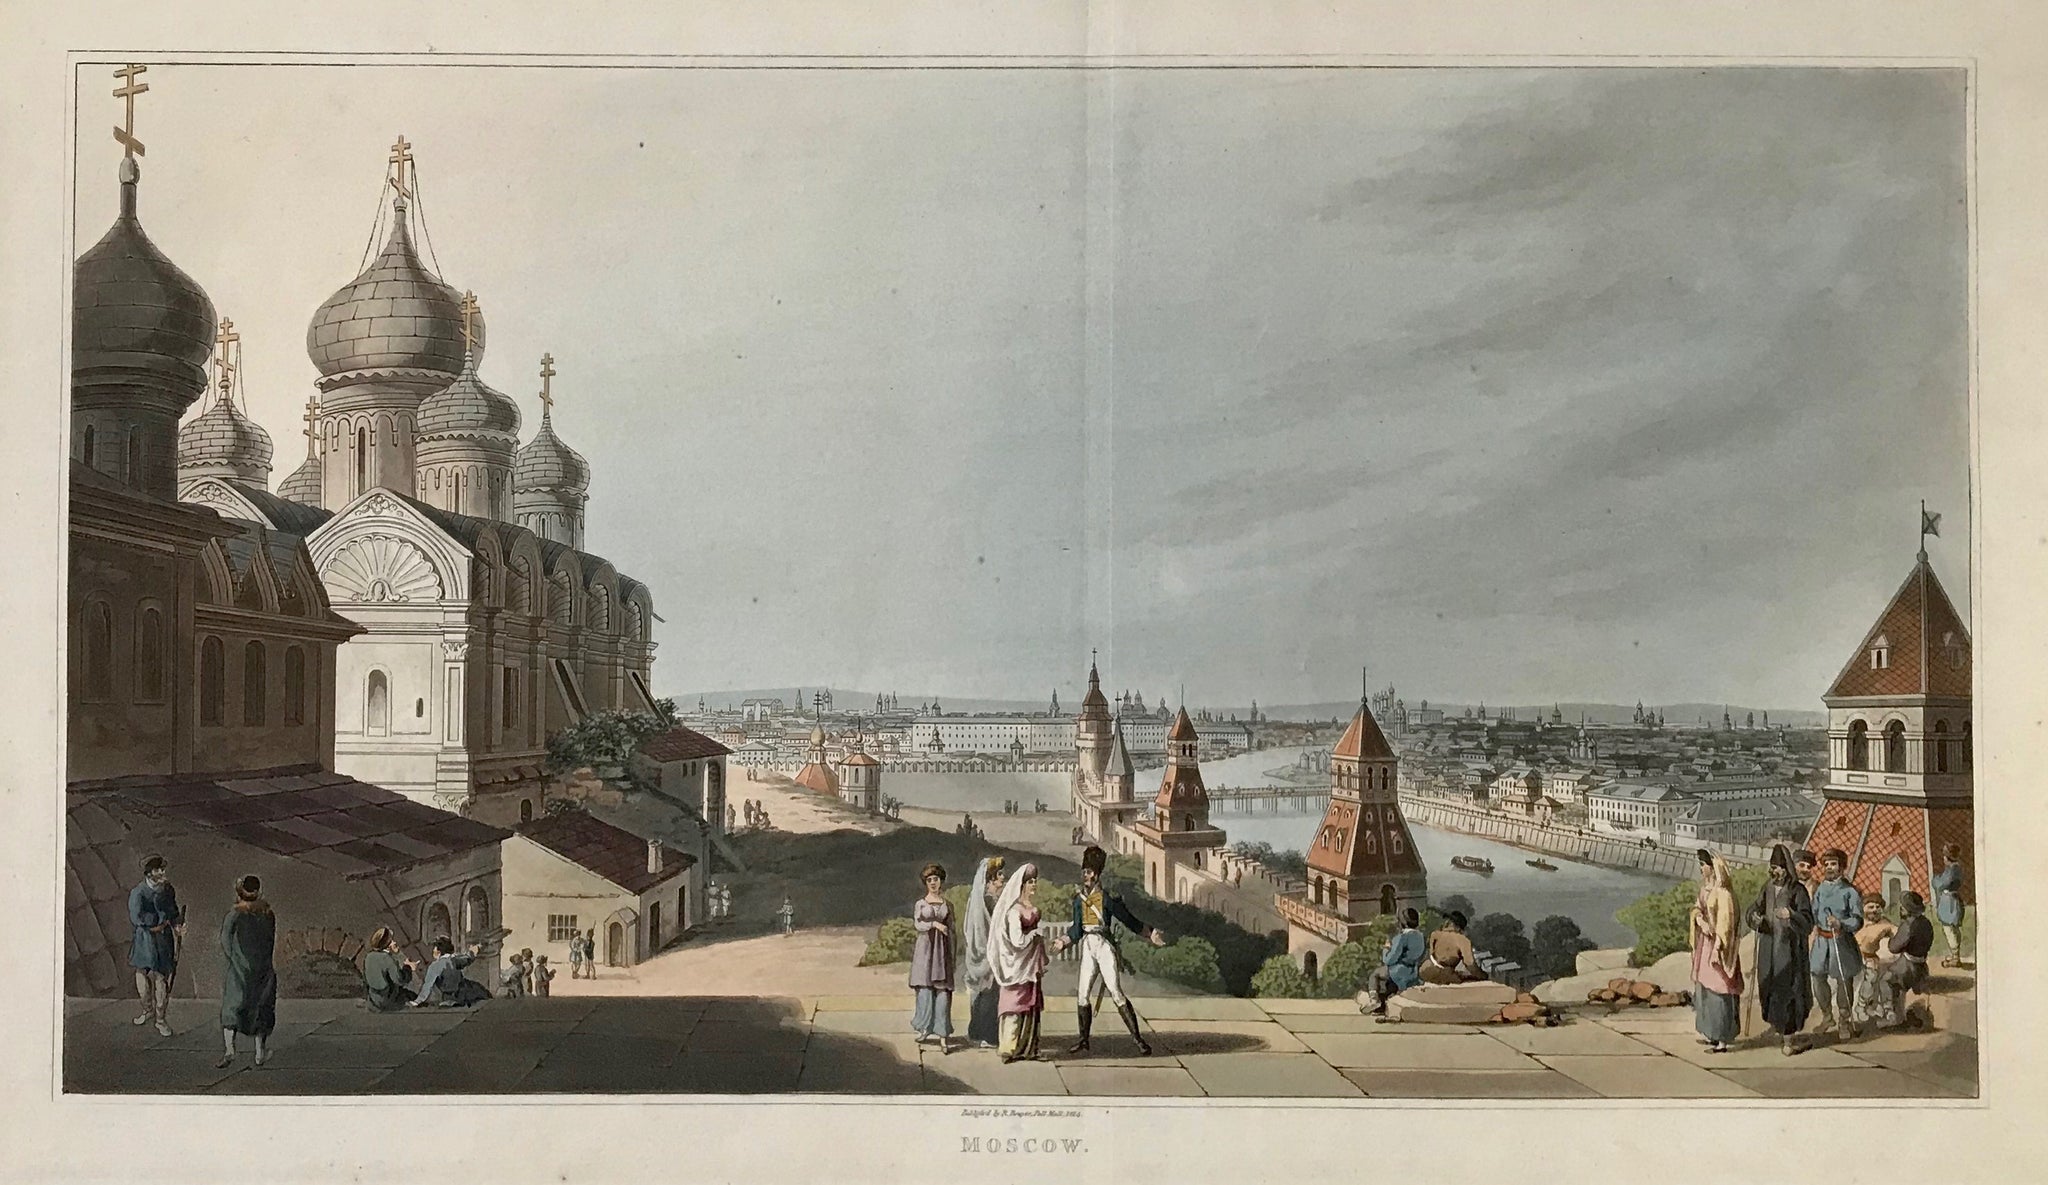 "Moscow".  Type of print: Aquatint  Color: Finely executed original hand coloring  Publisher: Robert Bowyer (1758-1834)  Where / When: London, aquatints is dated 1814. Publication: 1816  Published in: "An illustrated Record of important Events during the years 1812-1815"  A very attractive, beautifully hand-colored panoramic view of Moscow. The Kremlin left foreground.